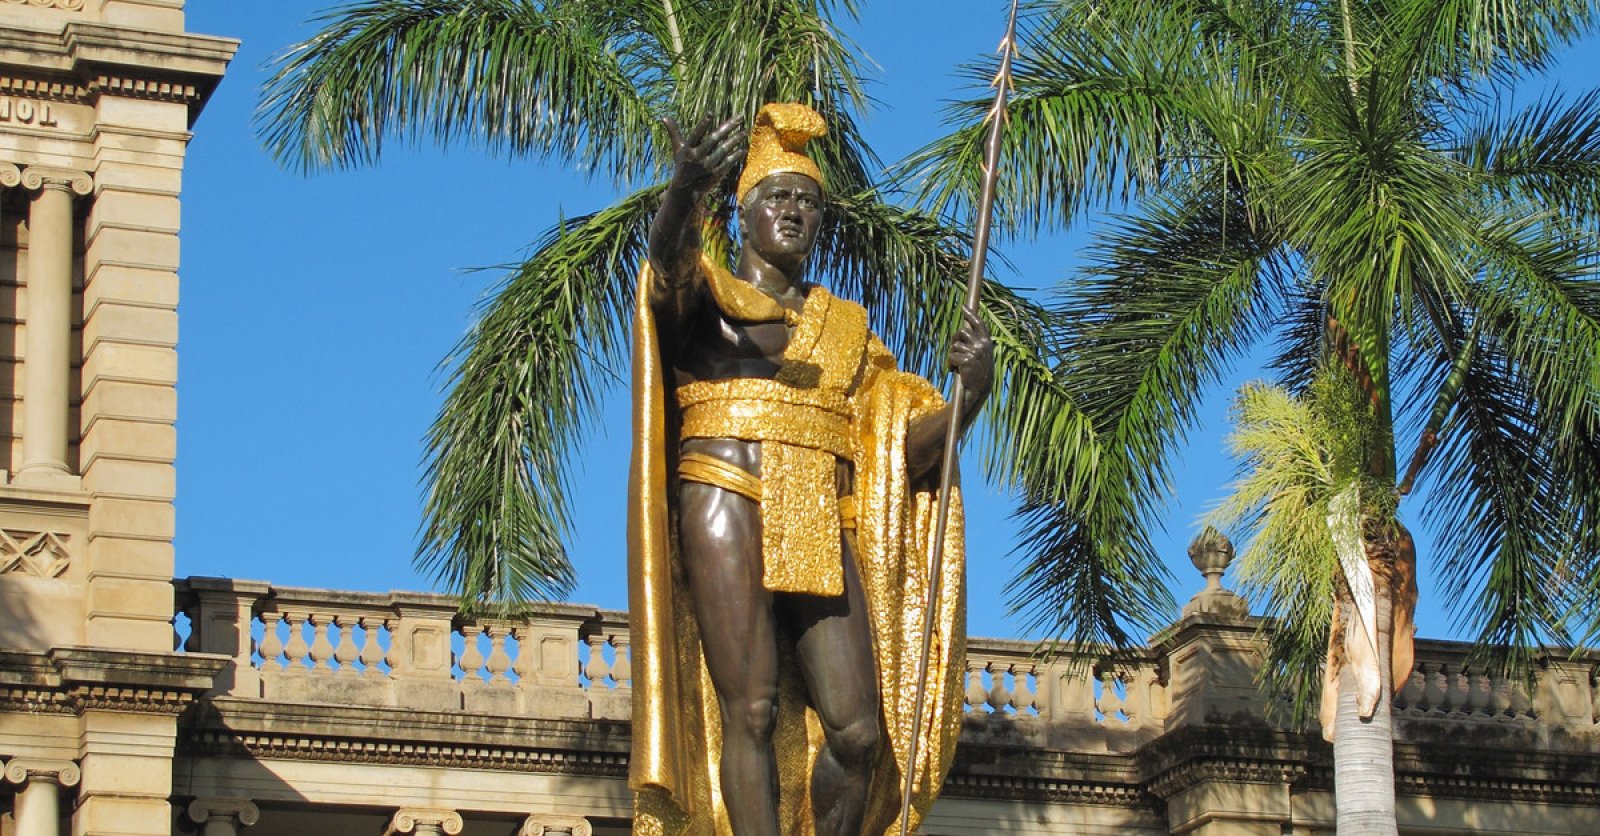 King Kamehameha statue, which is found across the street